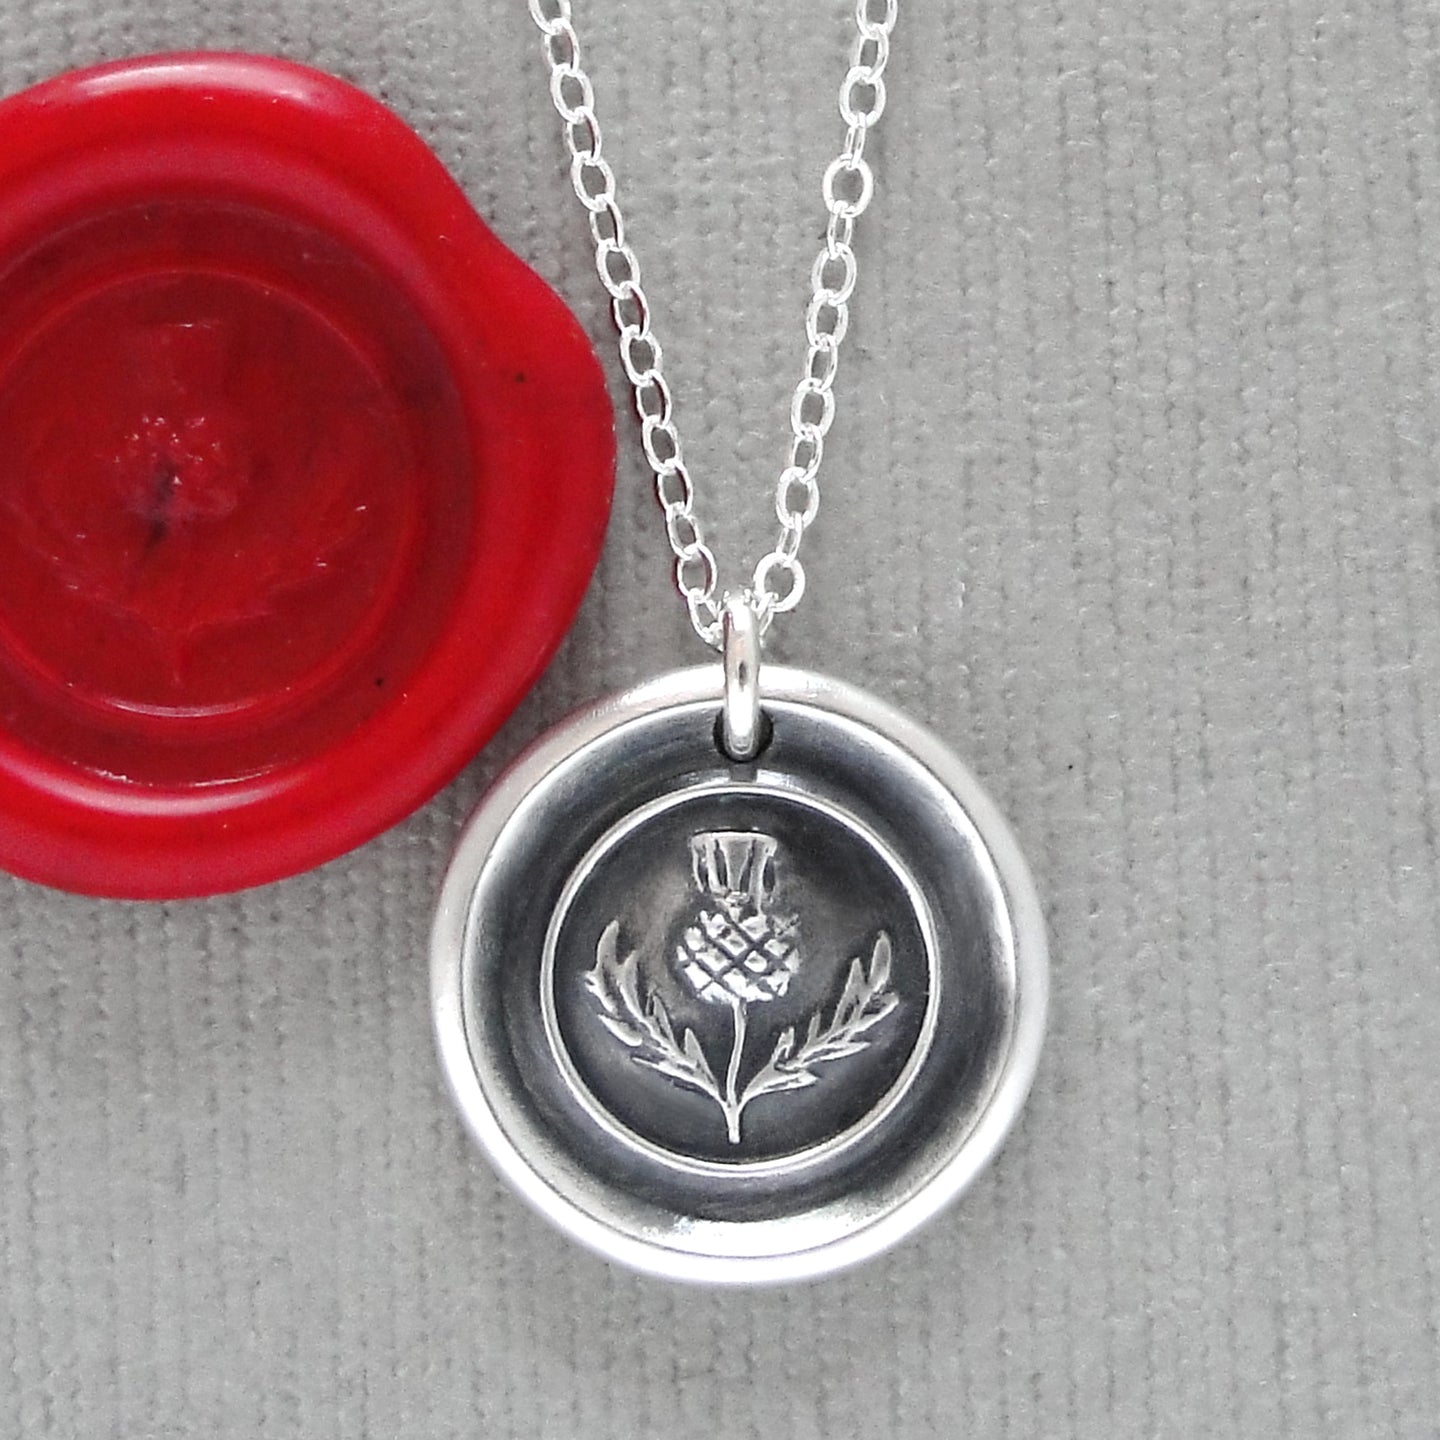 Thistle Wax Seal Necklace In Silver - Scottish heritage emblem jewelry - RQP Studio